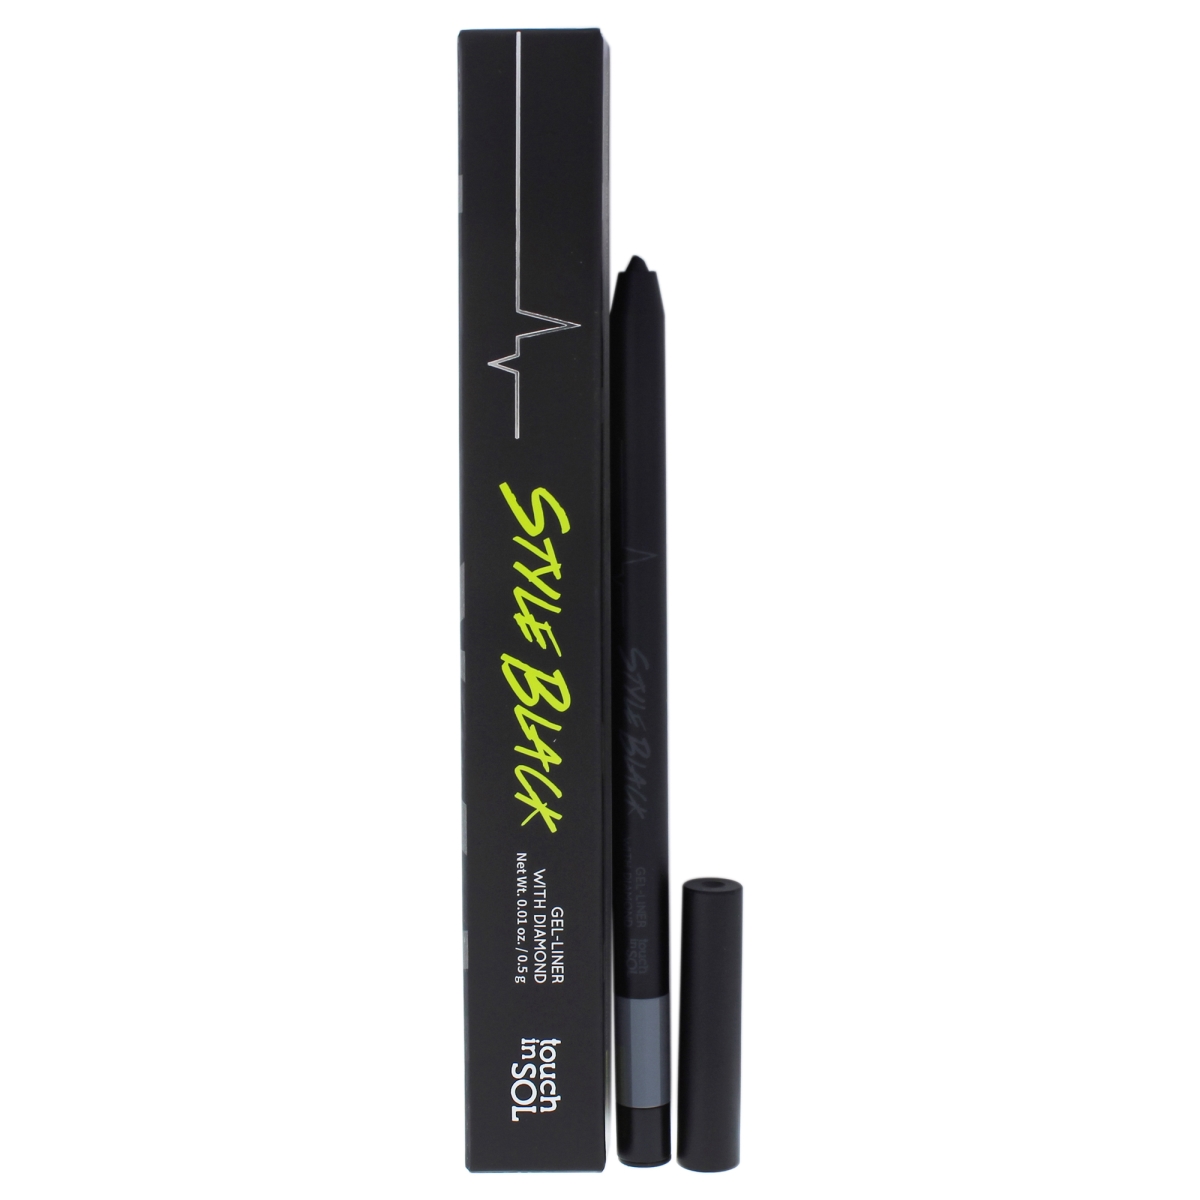 I0092070 Style Black Gel-liner With Diamond For Women - 1 Onix - 0.02 Oz